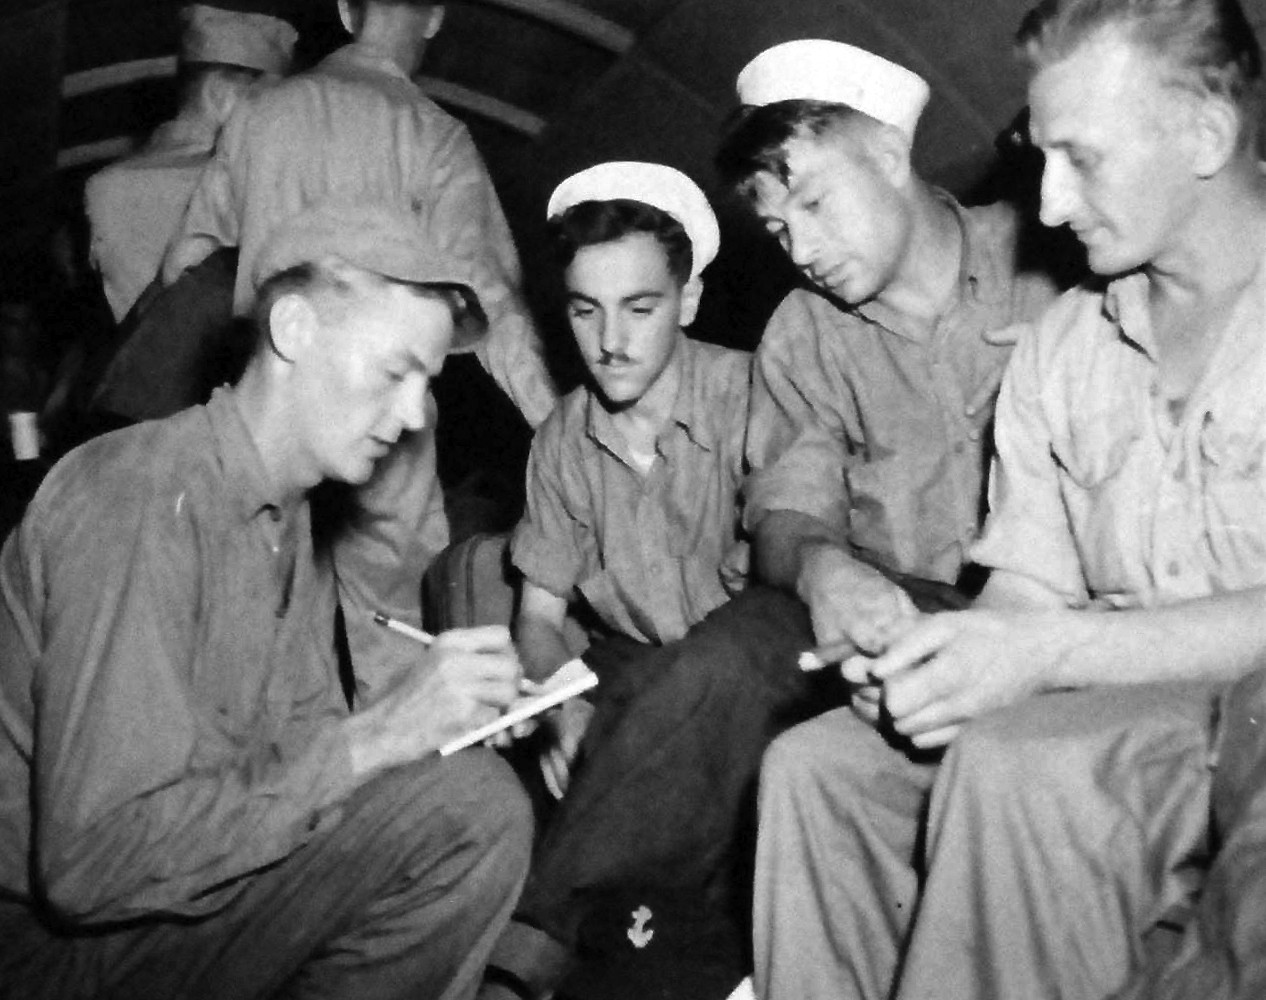 80-G-339126:   Allied Prisoners of War, 1945.   The prisoners are just returning from internment in Japan at Agana, Guam.  Shown left to right:  Photographer’s Mate Third Class Marine F. Rhode interviewing AMM3 Murray Glasser; Coxswain Earl King; and BM1 Raymond J. Jakubielski, September 4, 1945.   Photographed by D.M. Edinger.  Official U.S. Navy photograph, now in the collections of the National Archives.  (2013/08/14).   Note, original photograph is small.  